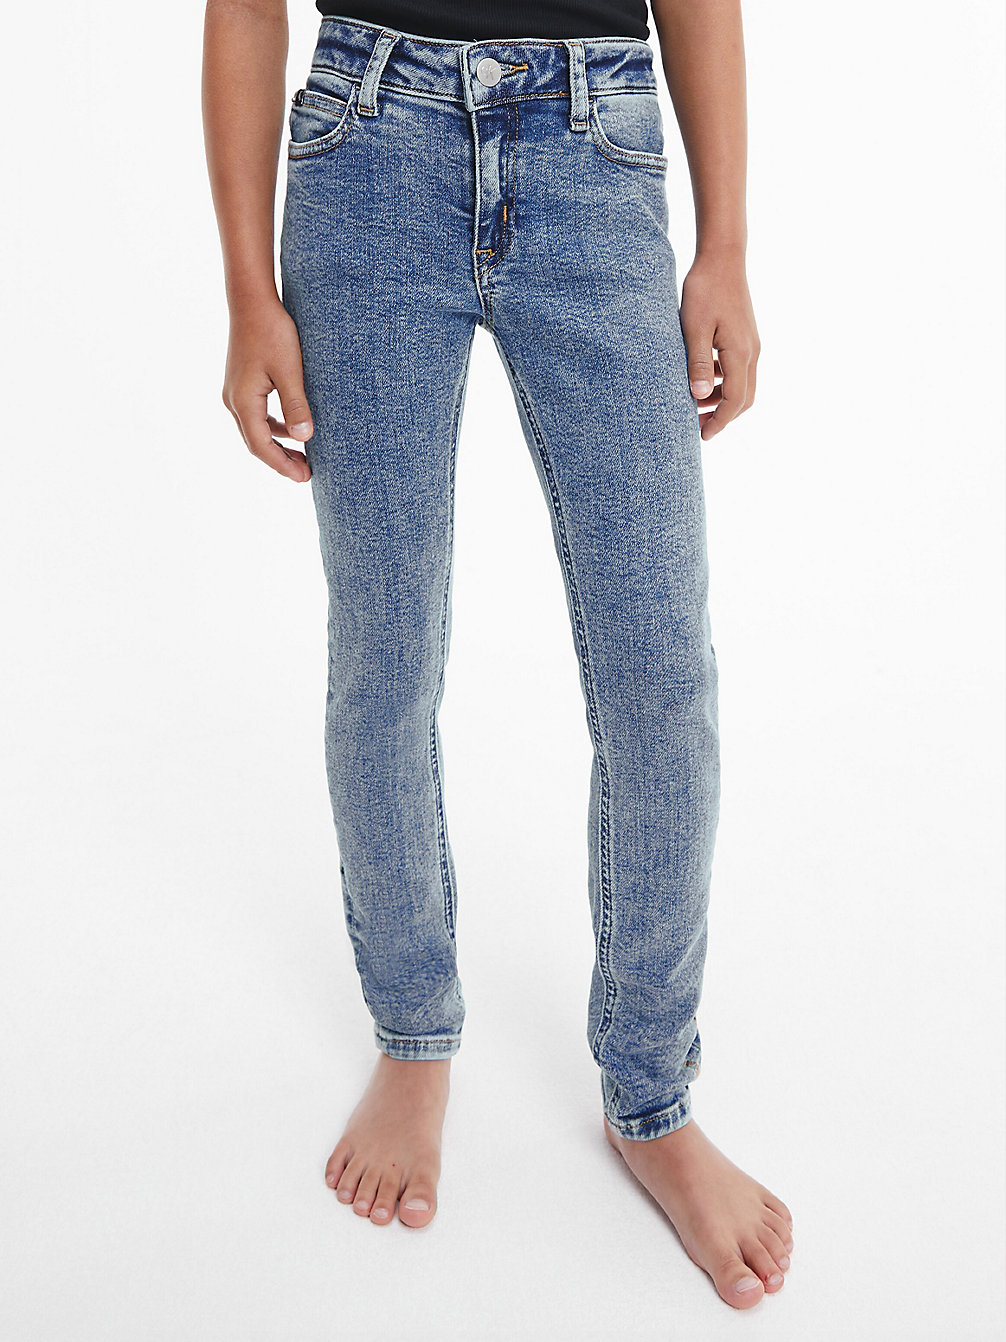 STONE WASH MID BLUE Mid Rise Skinny Jeans undefined girls Calvin Klein